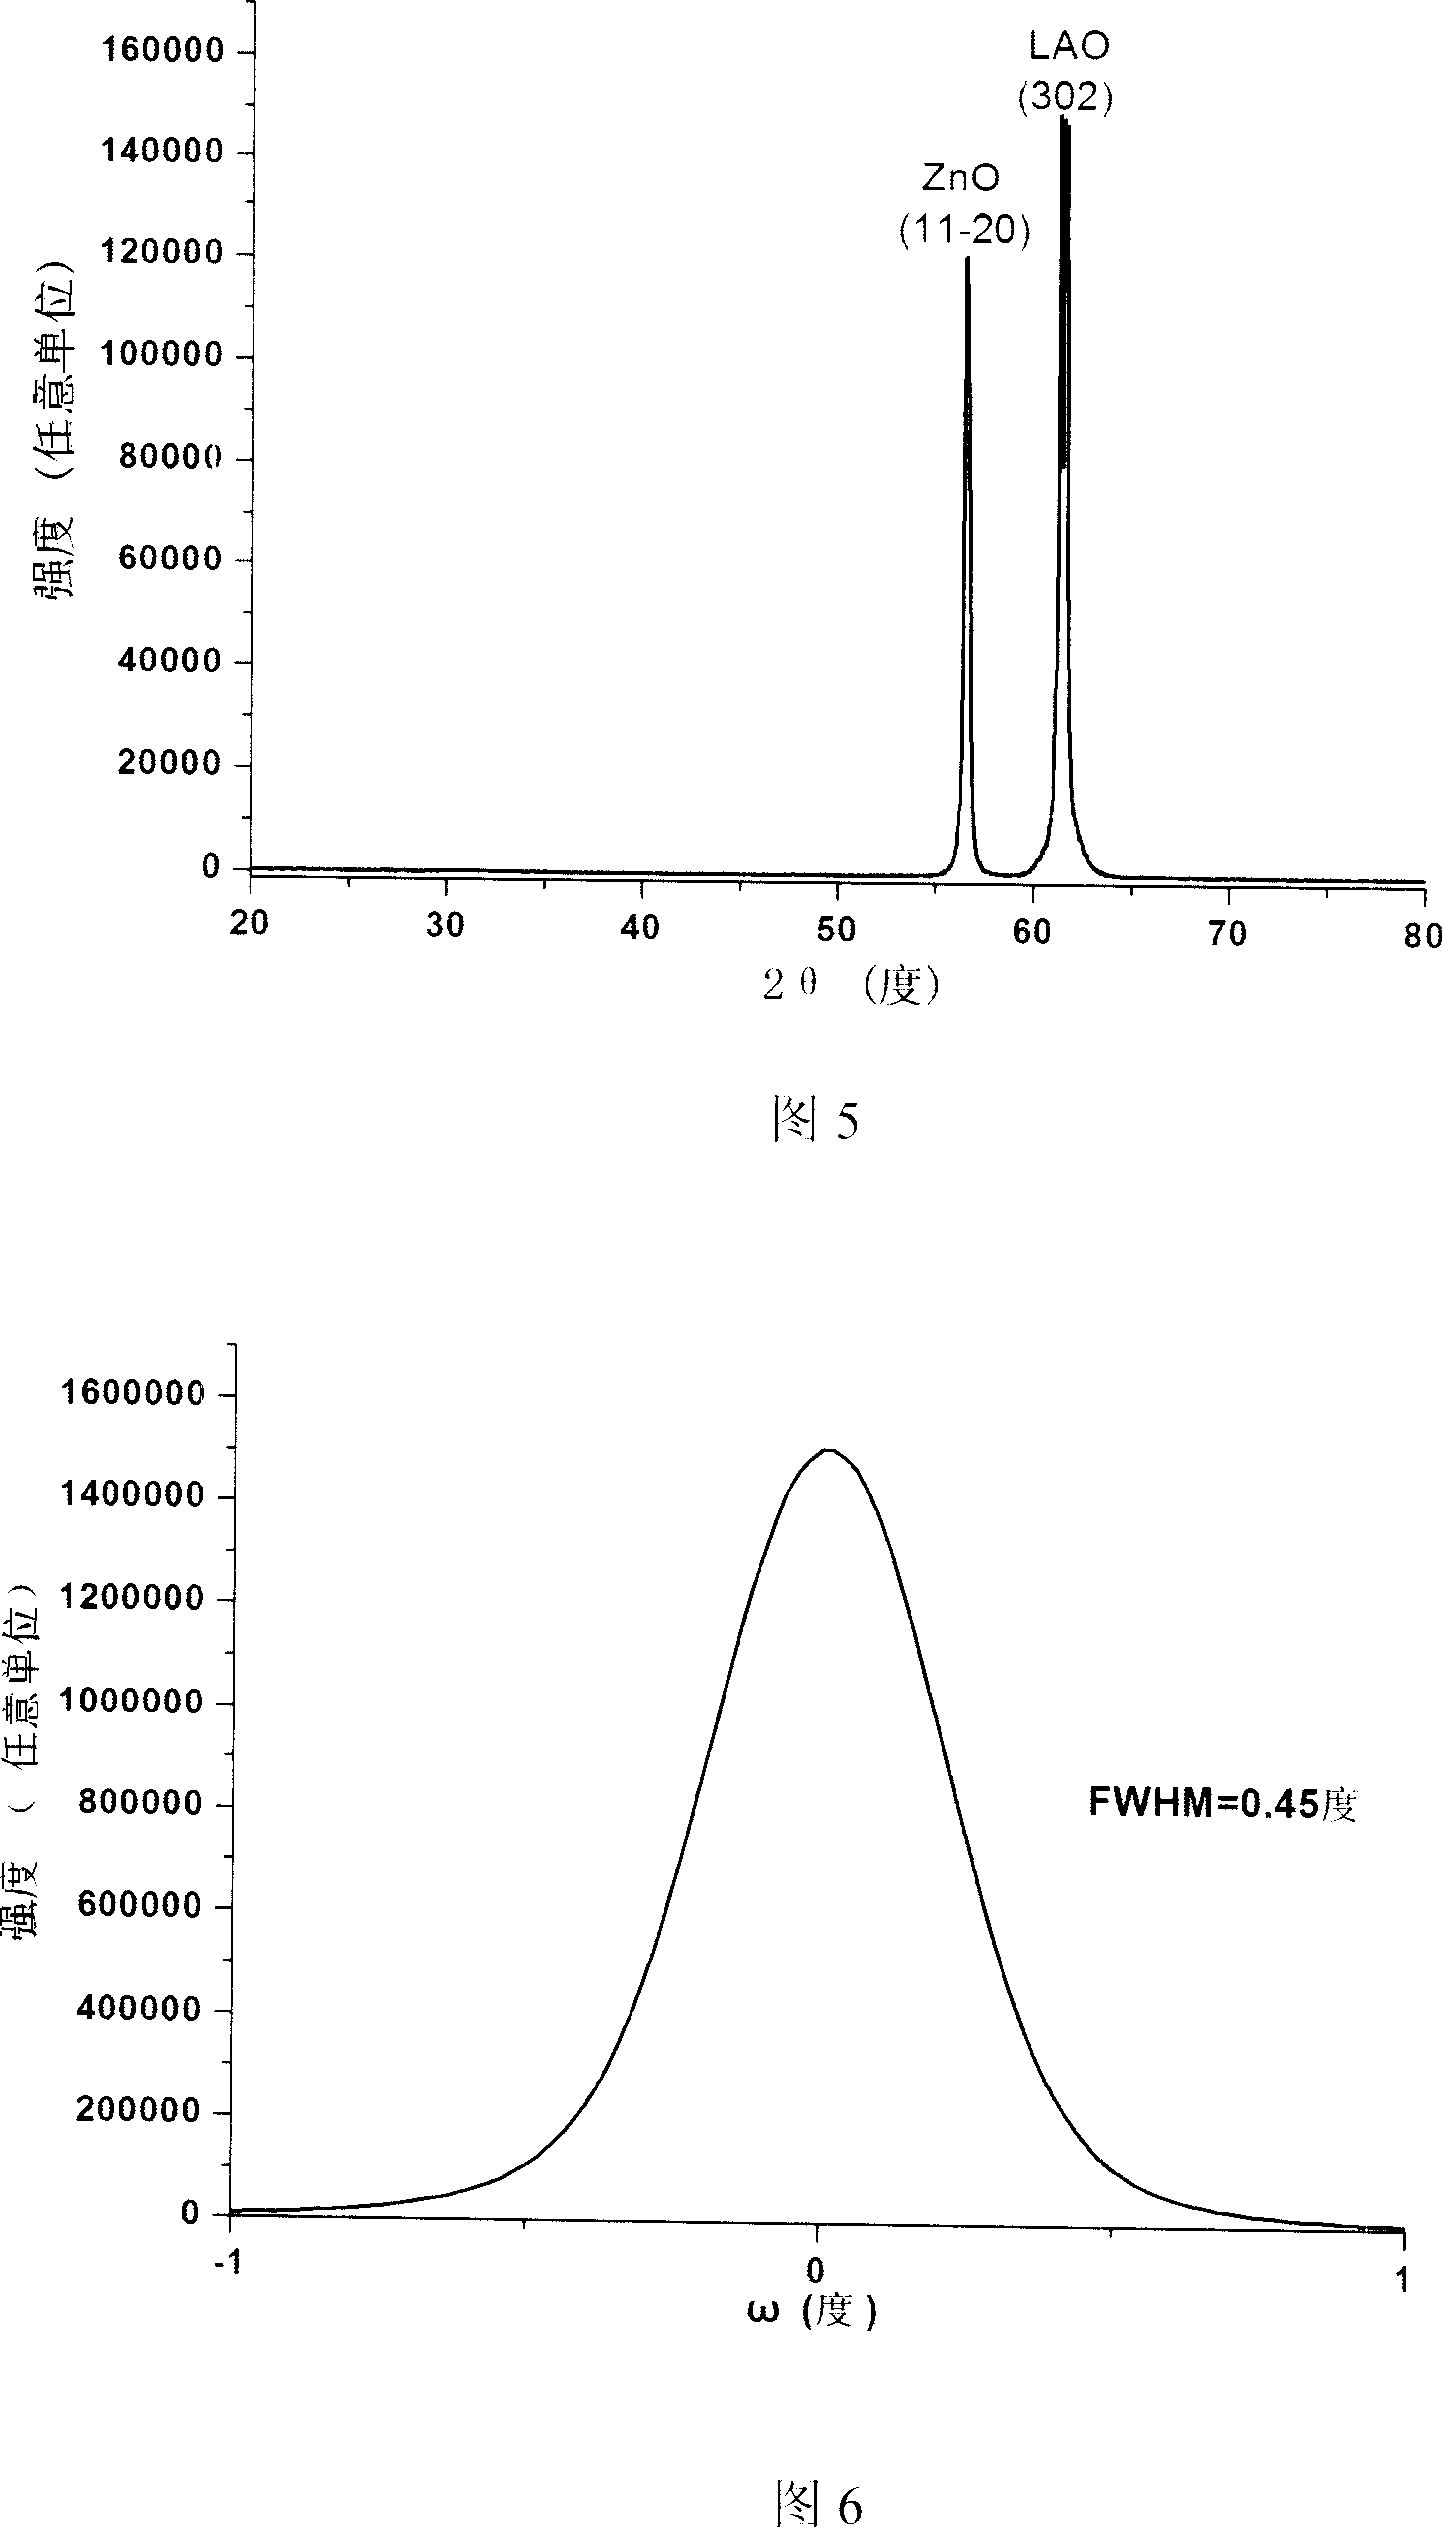 Method for developing m-face or a-face ZnO film by metal organic chemical vapour deposition